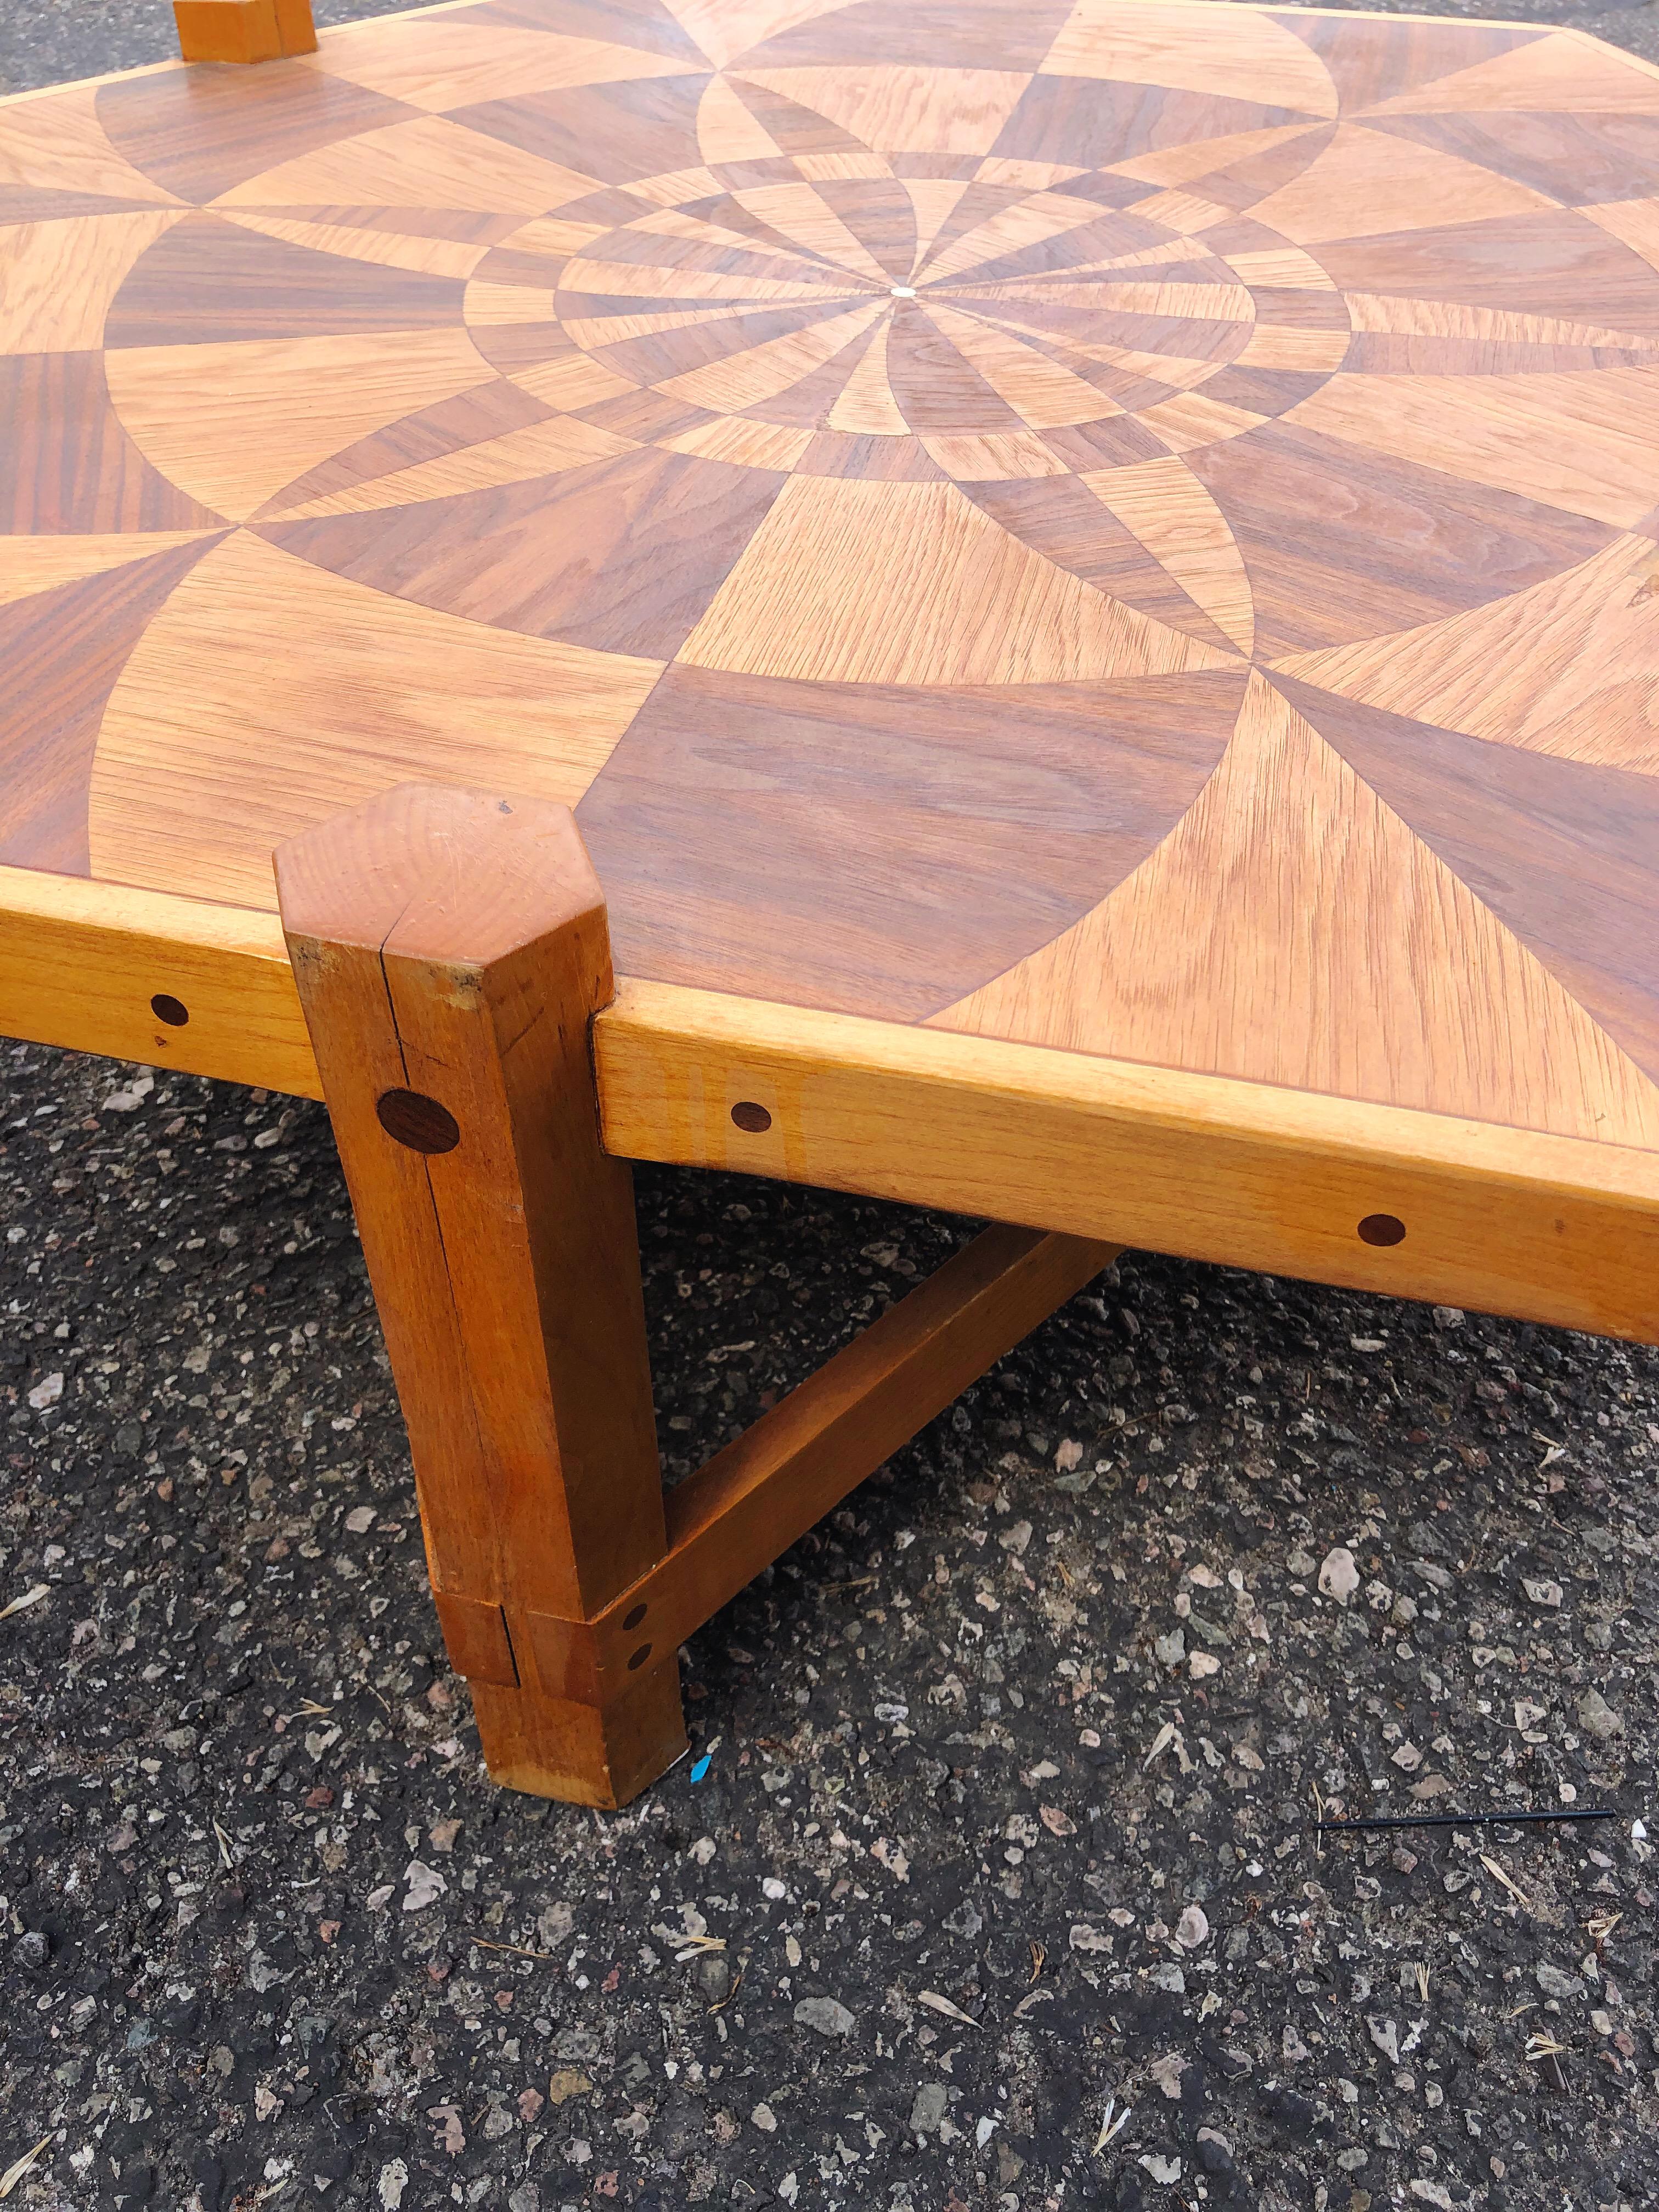 American Modernist Marquetry Folk Art Wooden Inlay Coffee Table with Geometric Design For Sale